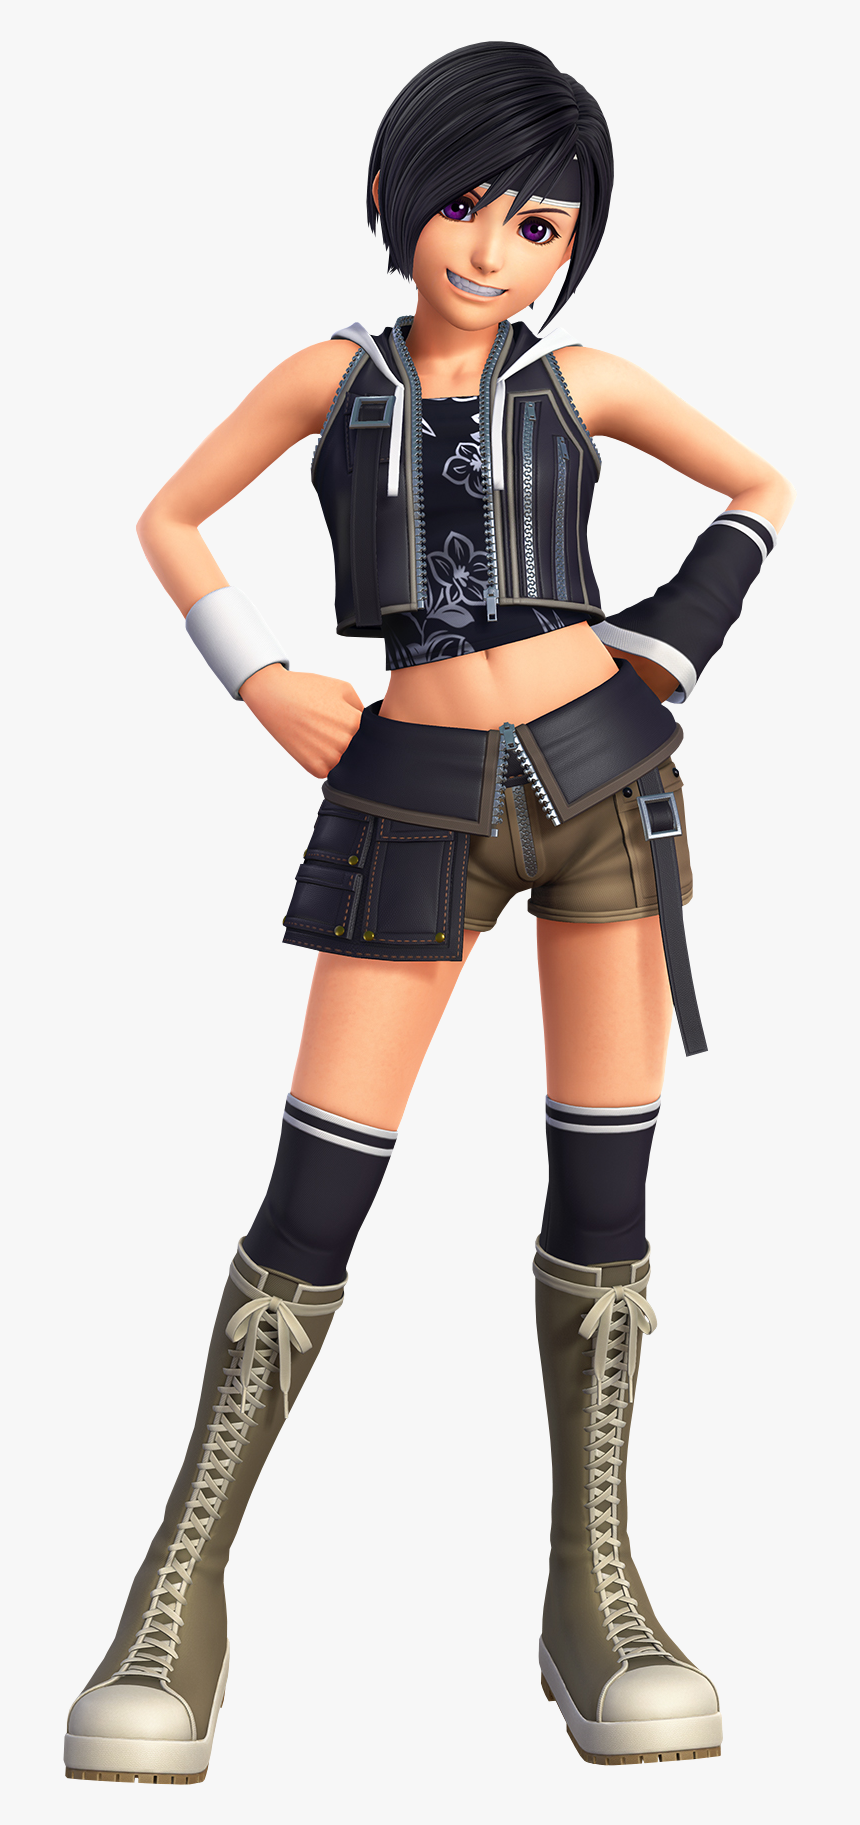 Yuffie Khiiirm - Kingdom Hearts 3 Remind Characters, HD Png Download, Free Download